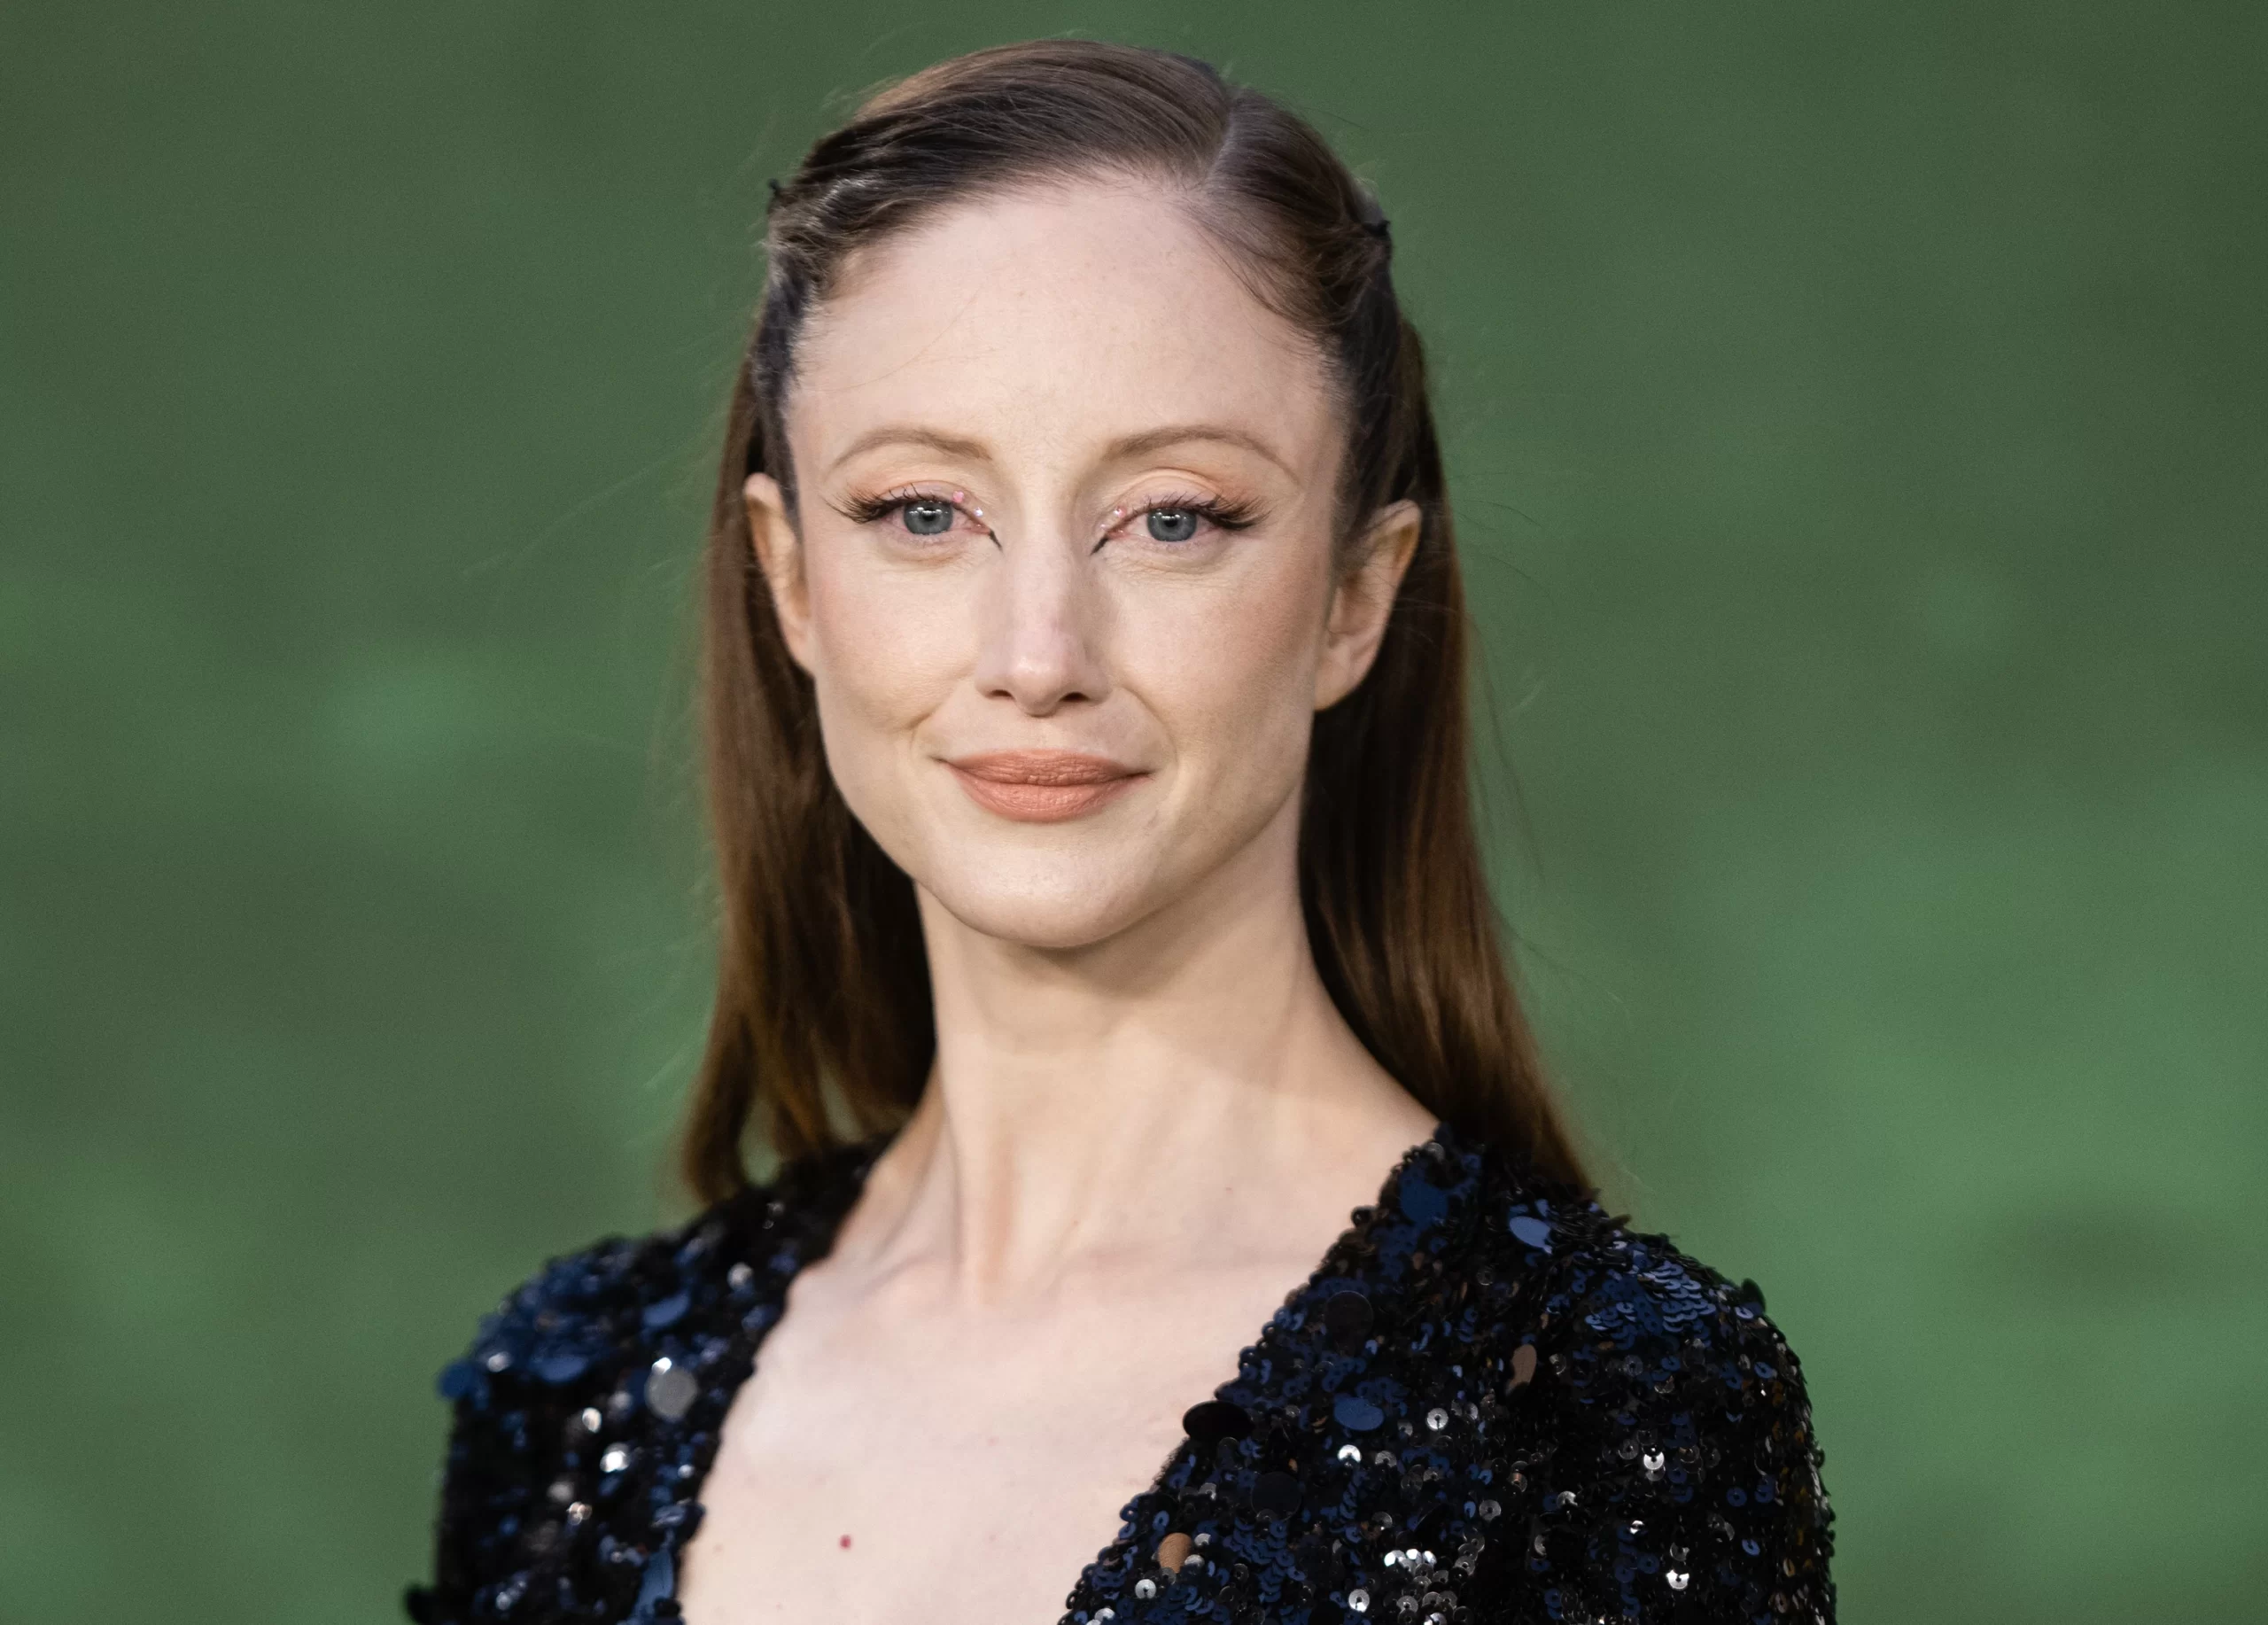 Andrea Riseborough to keep Oscar nomination, Academy releases statement amid ‘concerns’